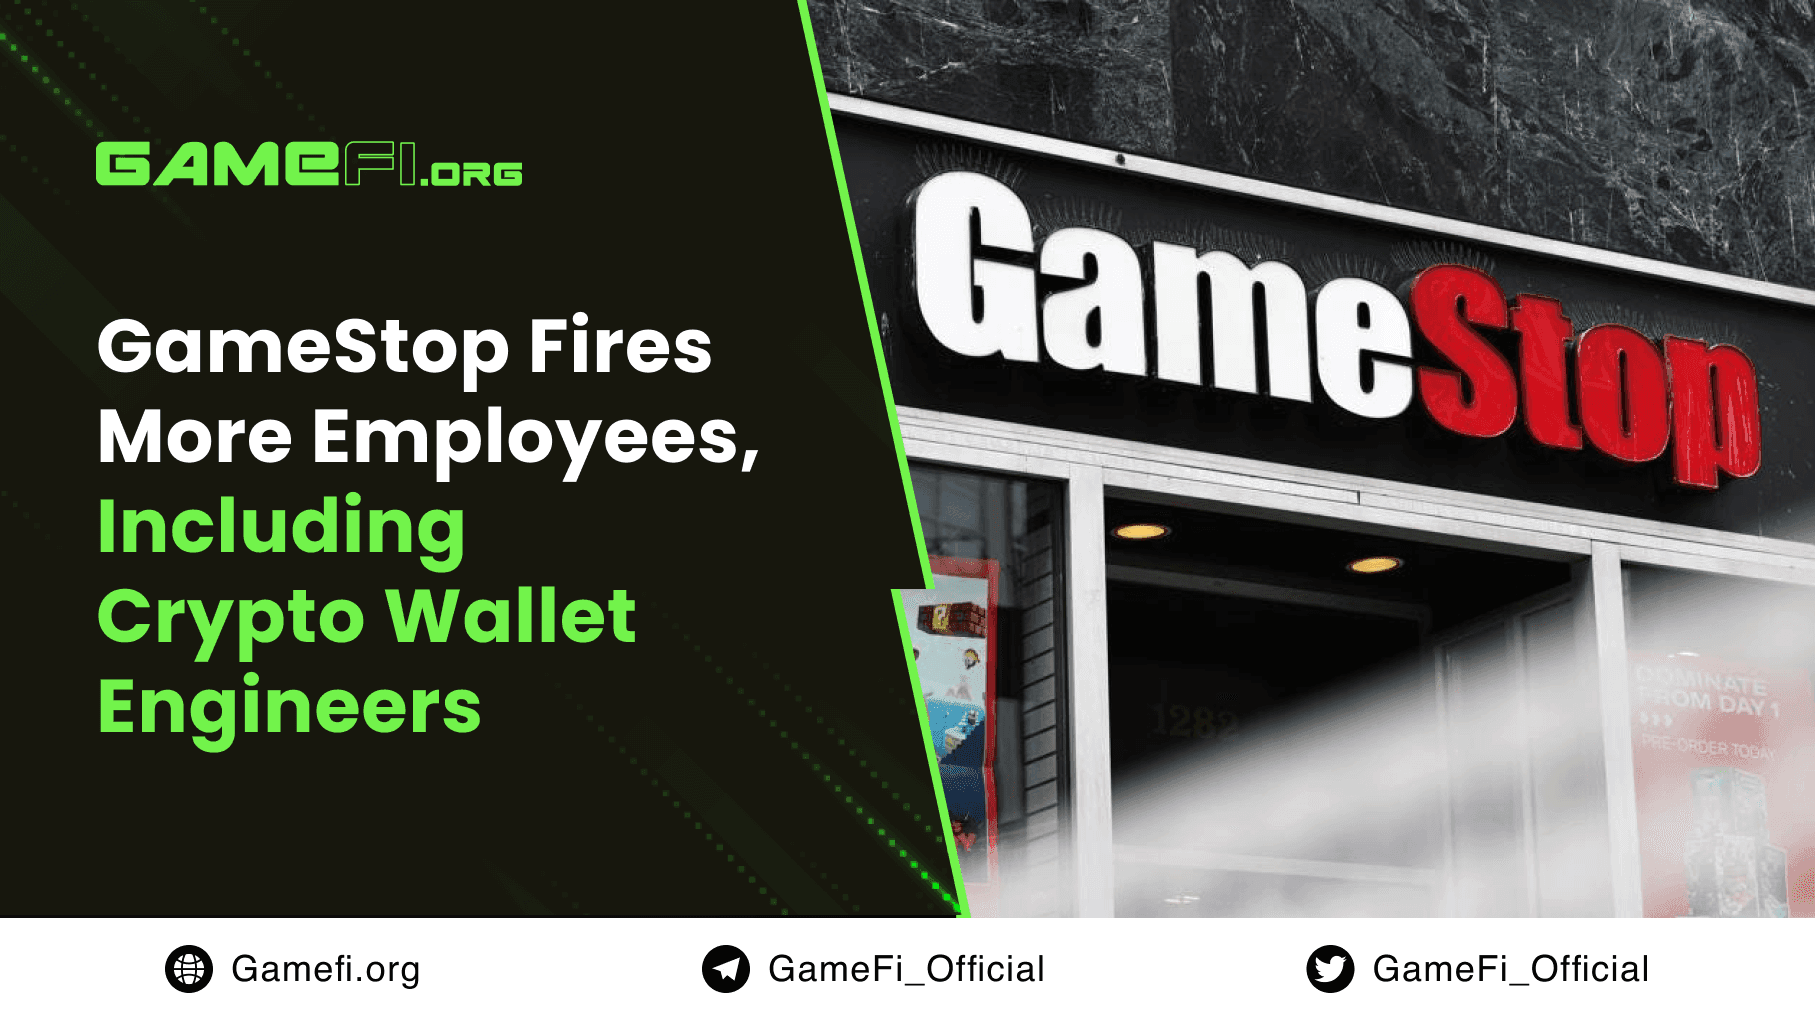 GameStop Fires More Employees, Including Crypto Wallet Engineers